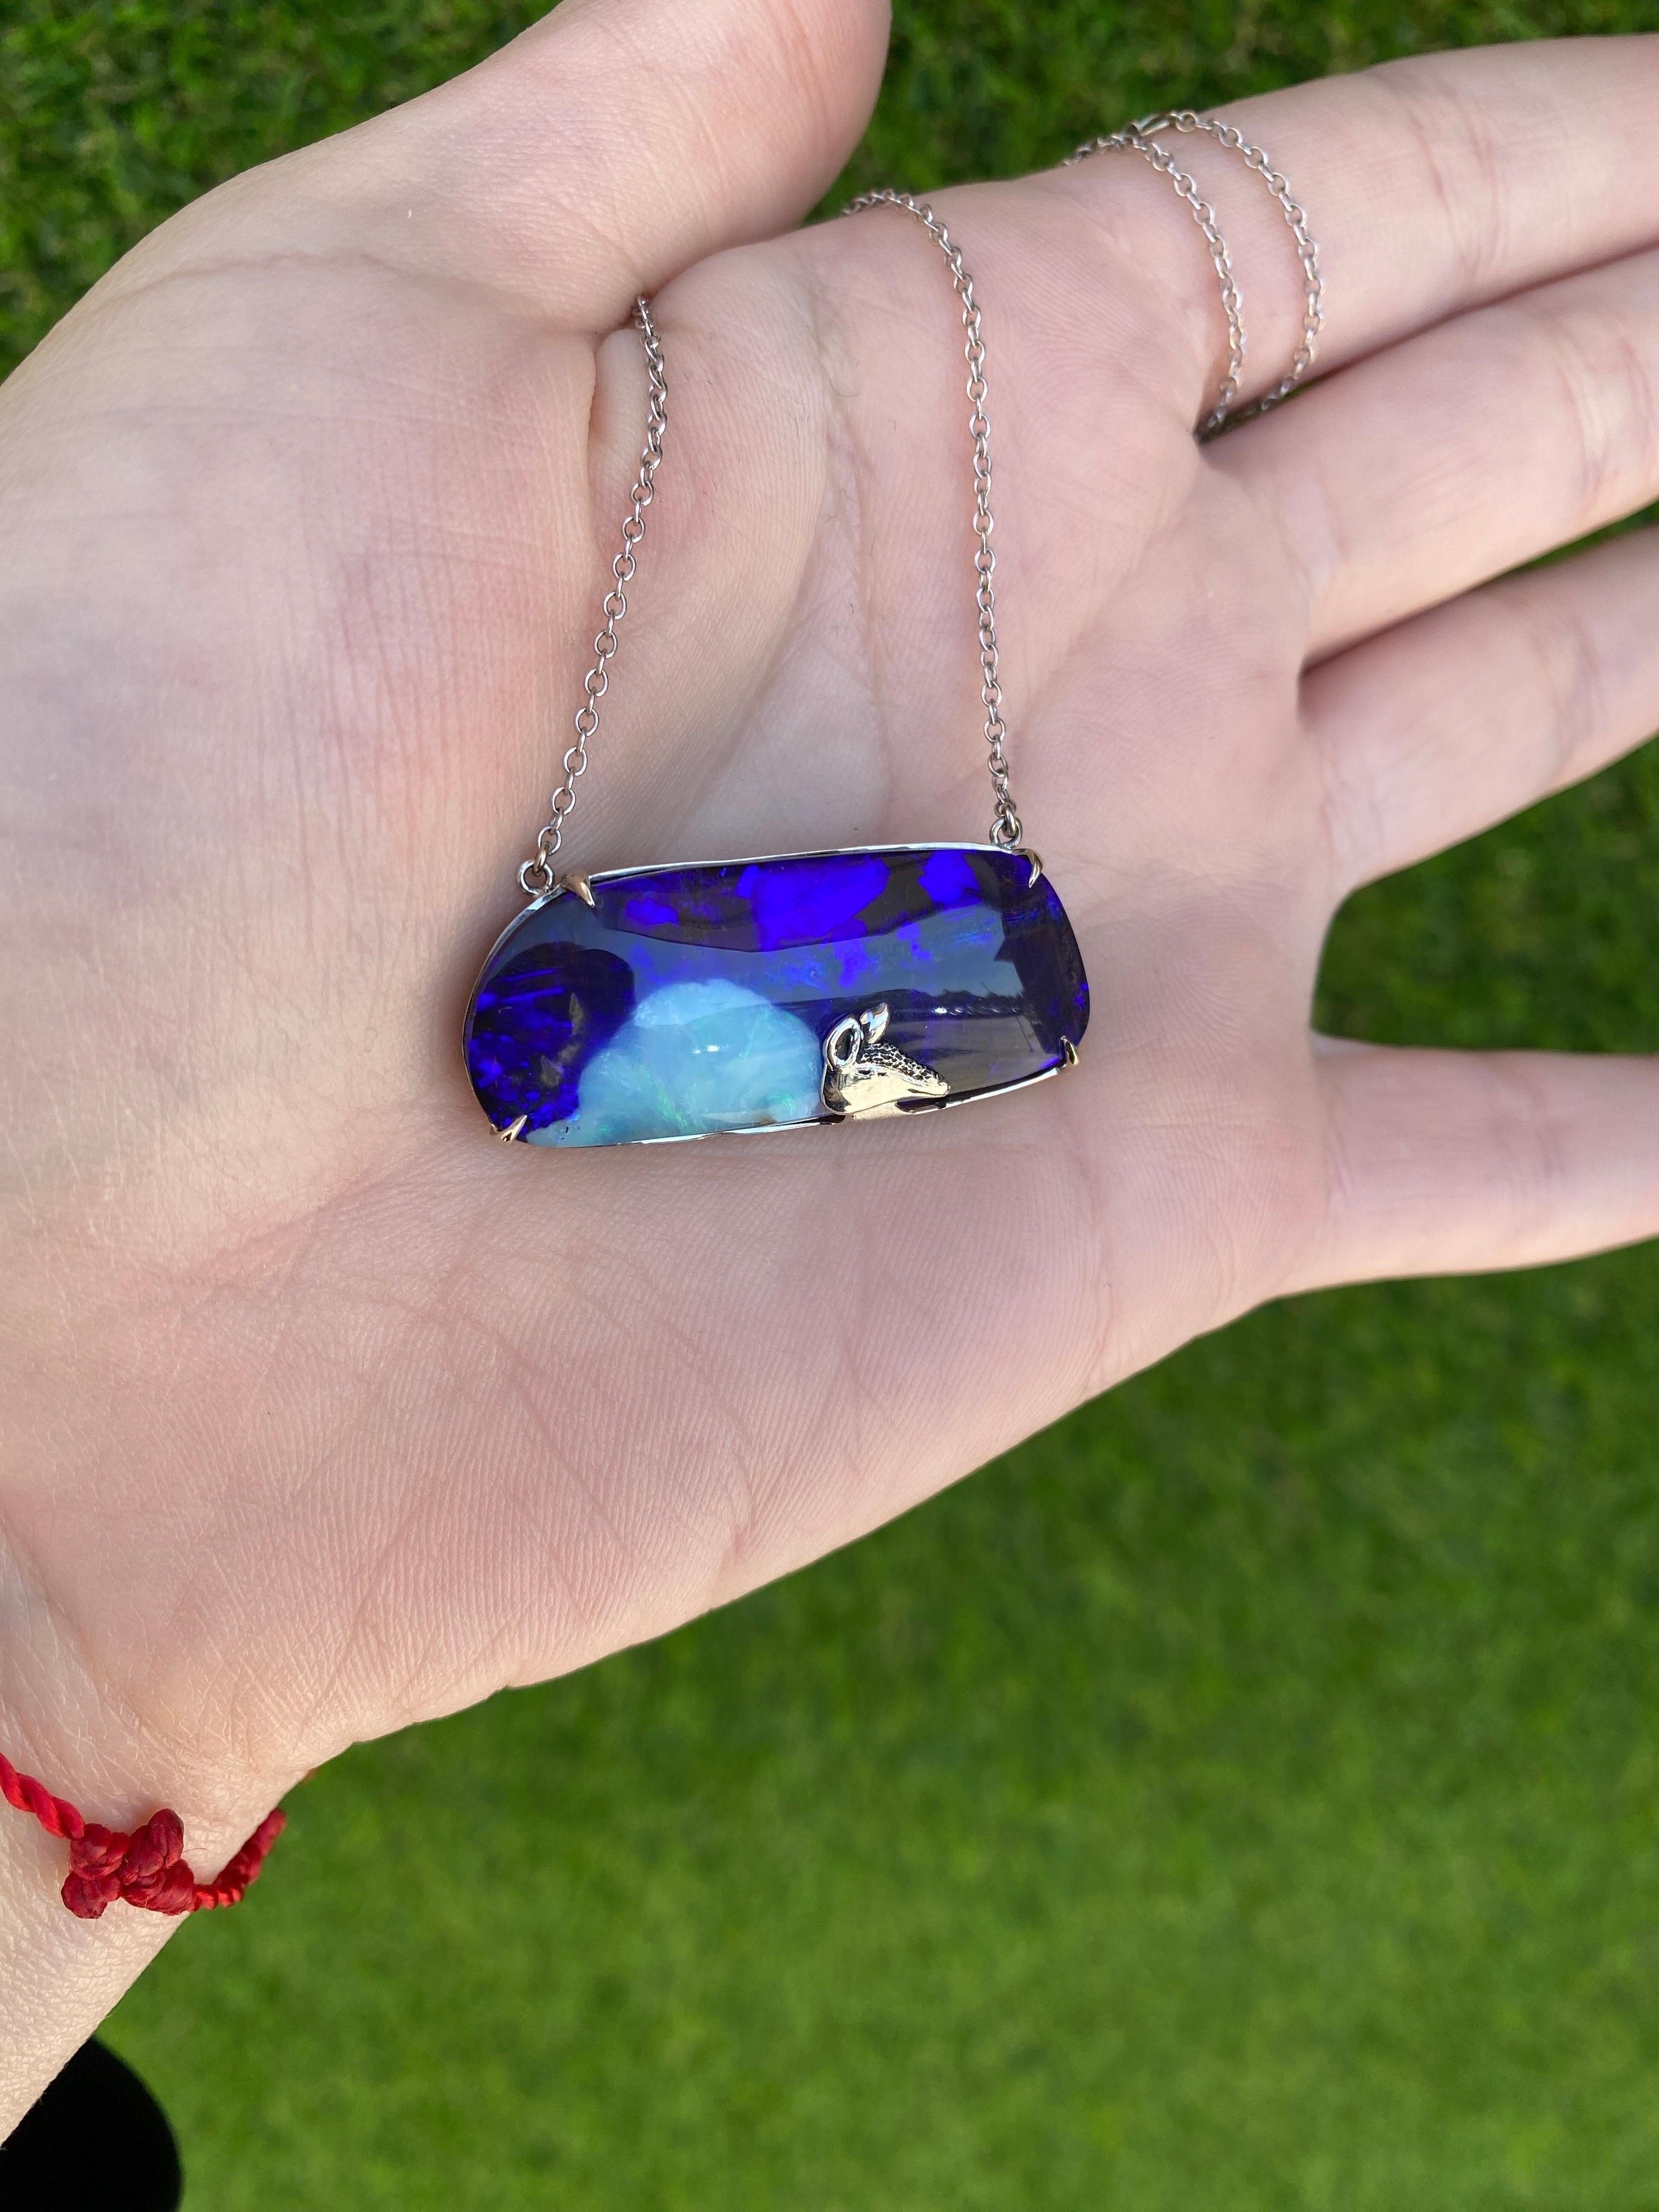 36.15 Carat Boulder Opal 18 Karat White Gold Necklace  In New Condition For Sale In Houston, TX